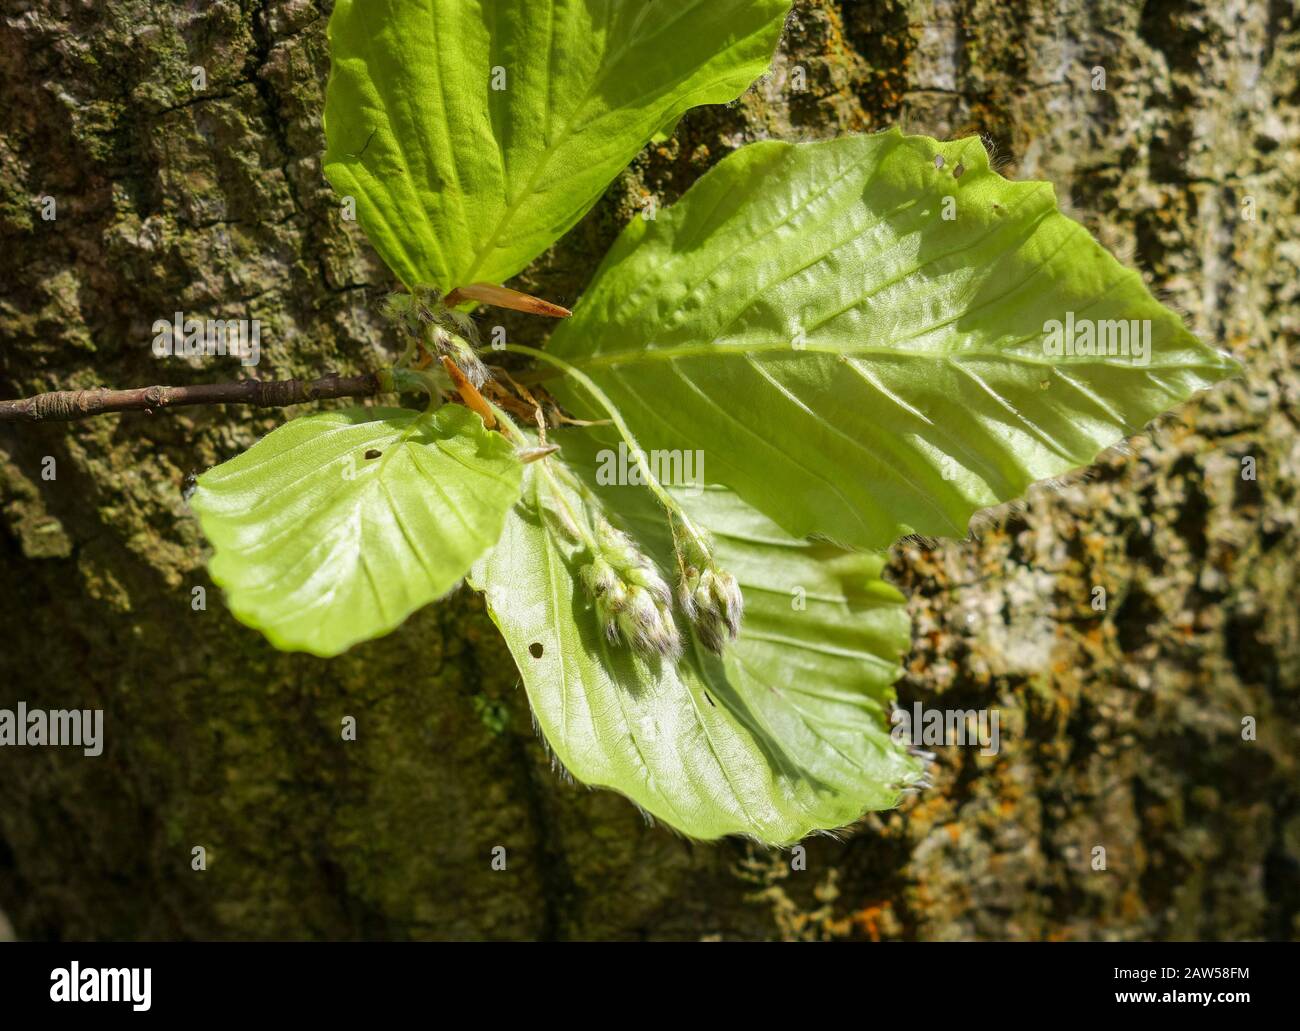 Beech tree (Fagus sylvatica), male flowers and new leaves in spring, England, UK Stock Photo